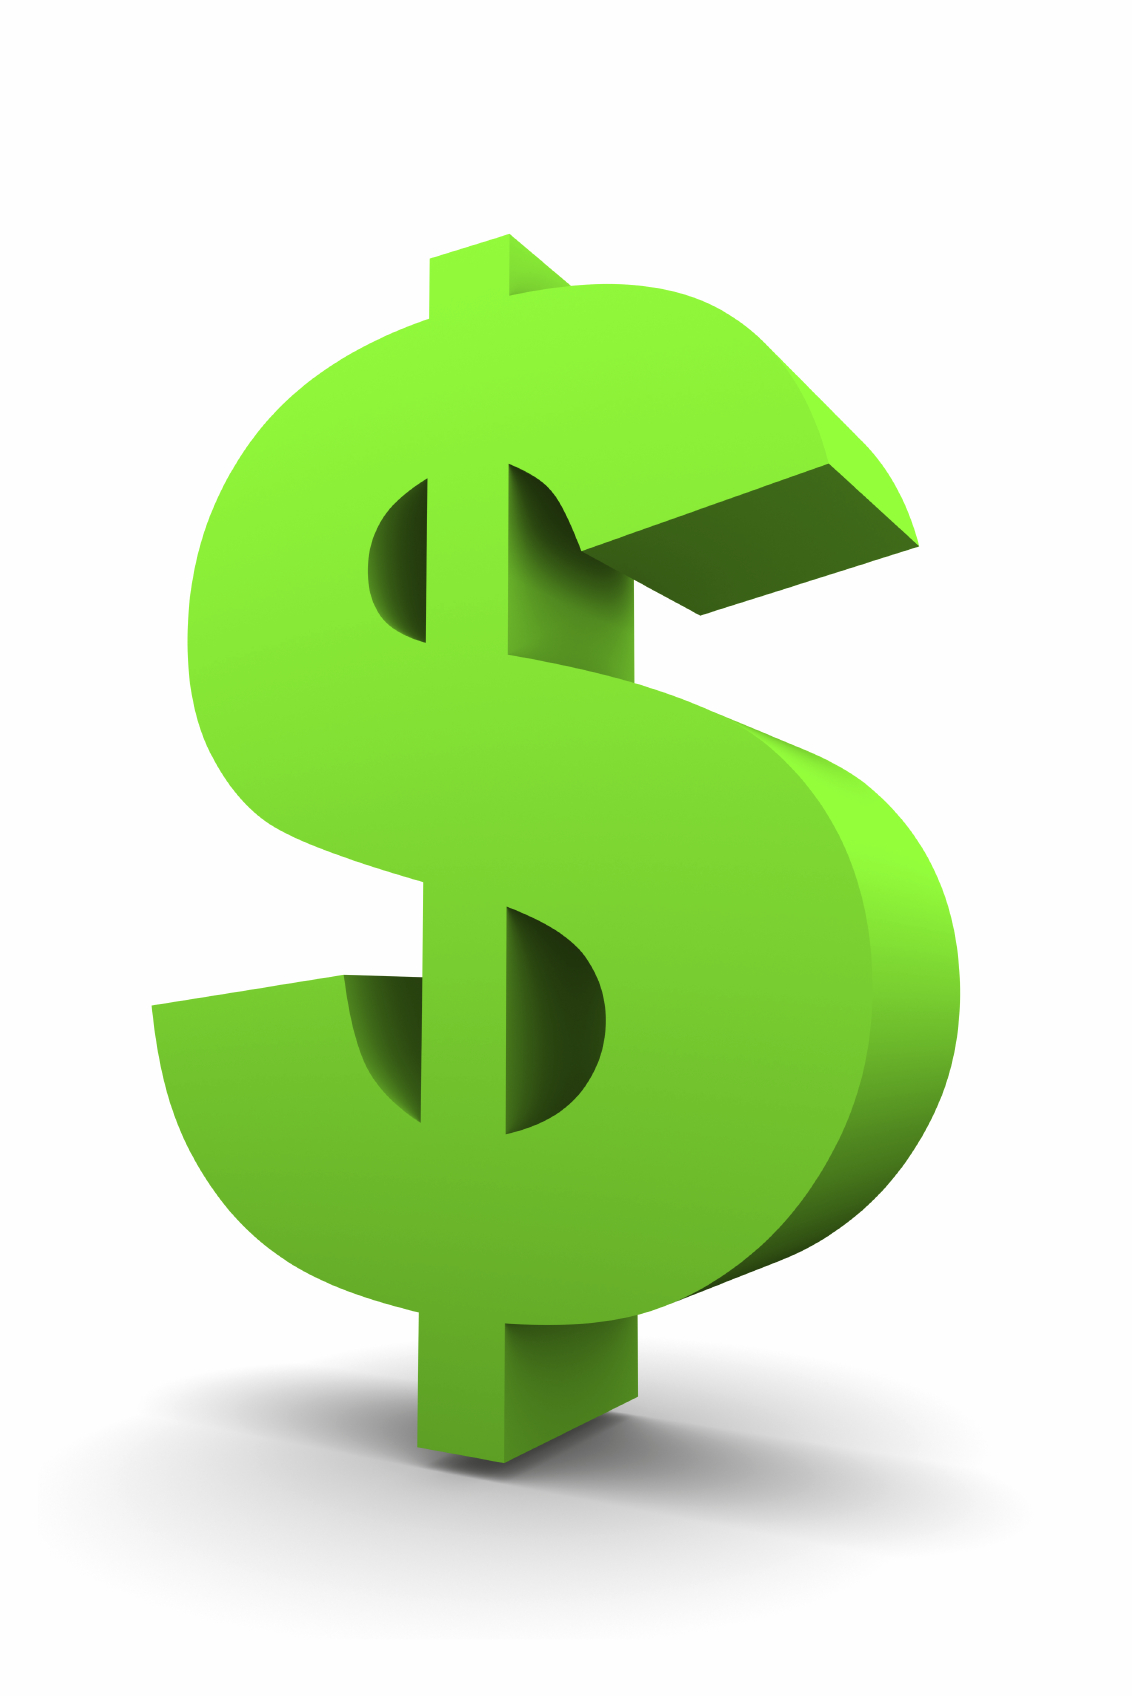 free clipart images dollar sign - photo #28